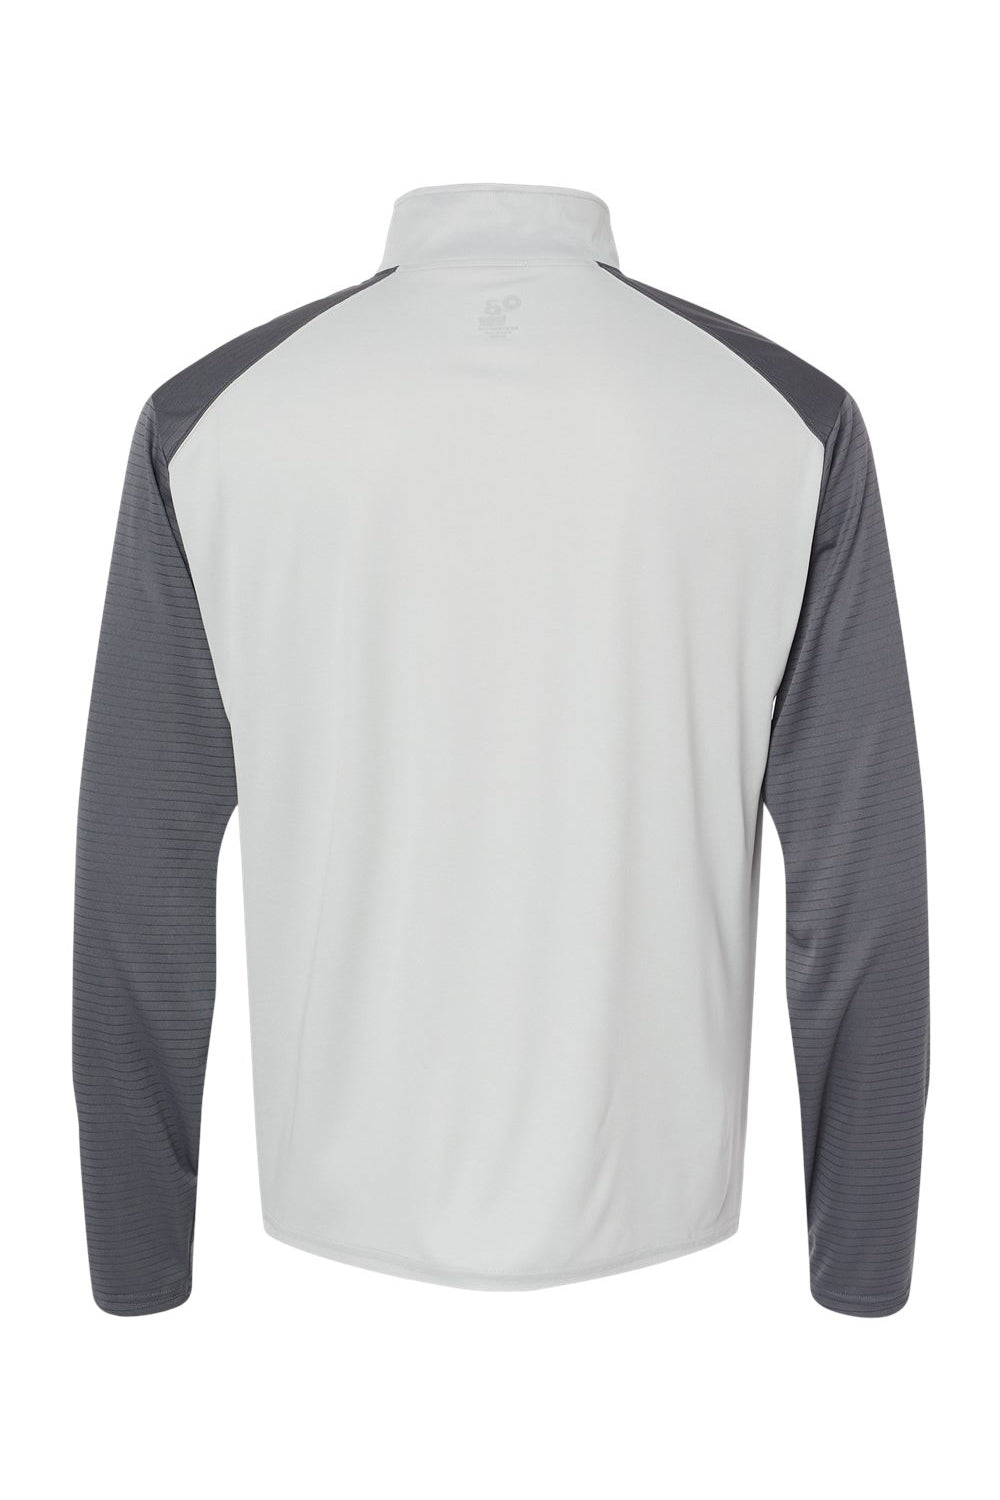 Badger 4231 Mens Breakout Moisture Wicking 1/4 Zip Pullover Silver Grey/Graphite Grey Flat Back